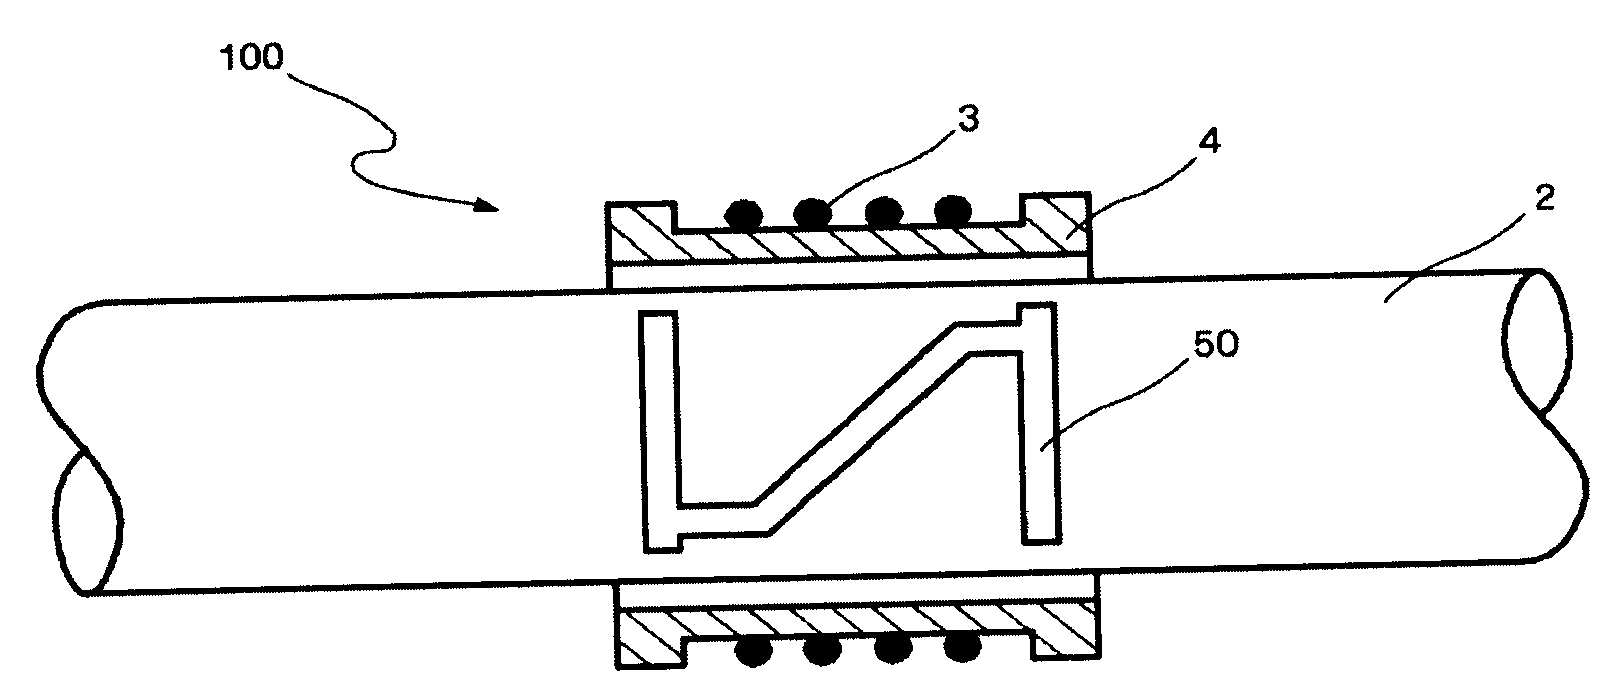 Magnetostrictive transducer using tailed patches and apparatus for measuring elastic wave using the magnetostrictive transducer